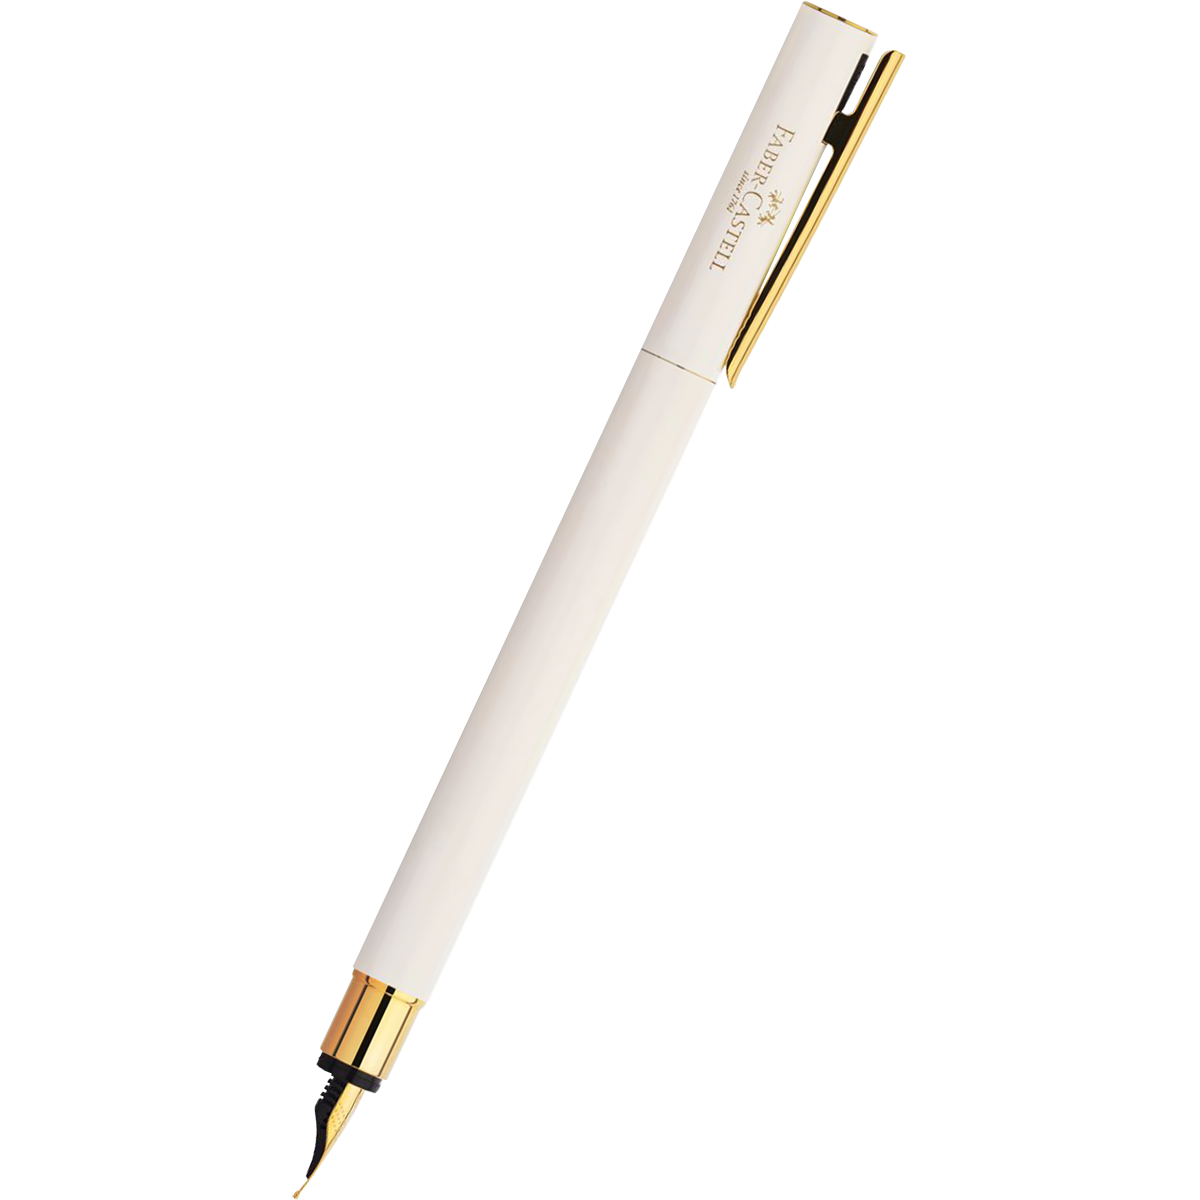 Faber-Castell NEO Slim Fountain Pen - Marshmallow (Limited Edition) Faber-Castell